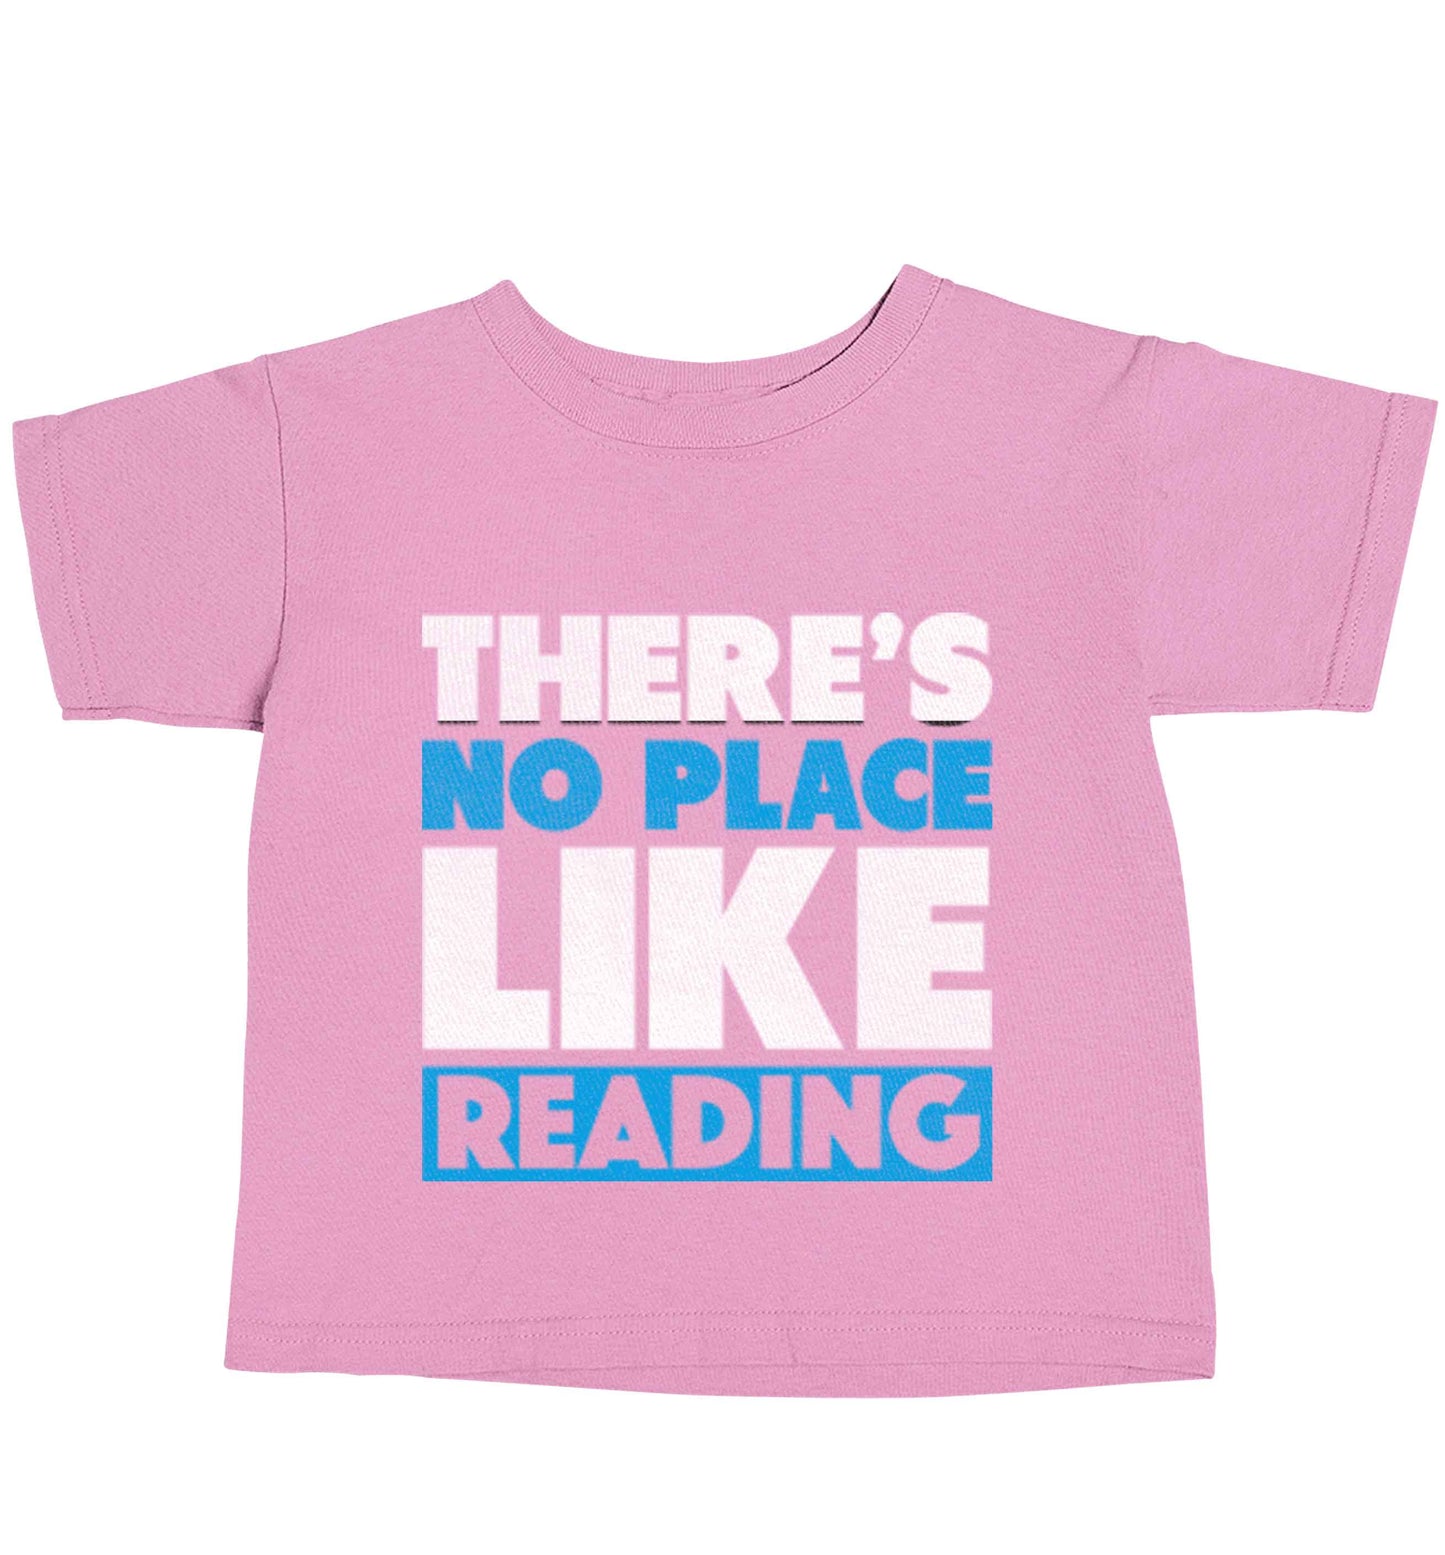 There's no place like Readinglight pink baby toddler Tshirt 2 Years